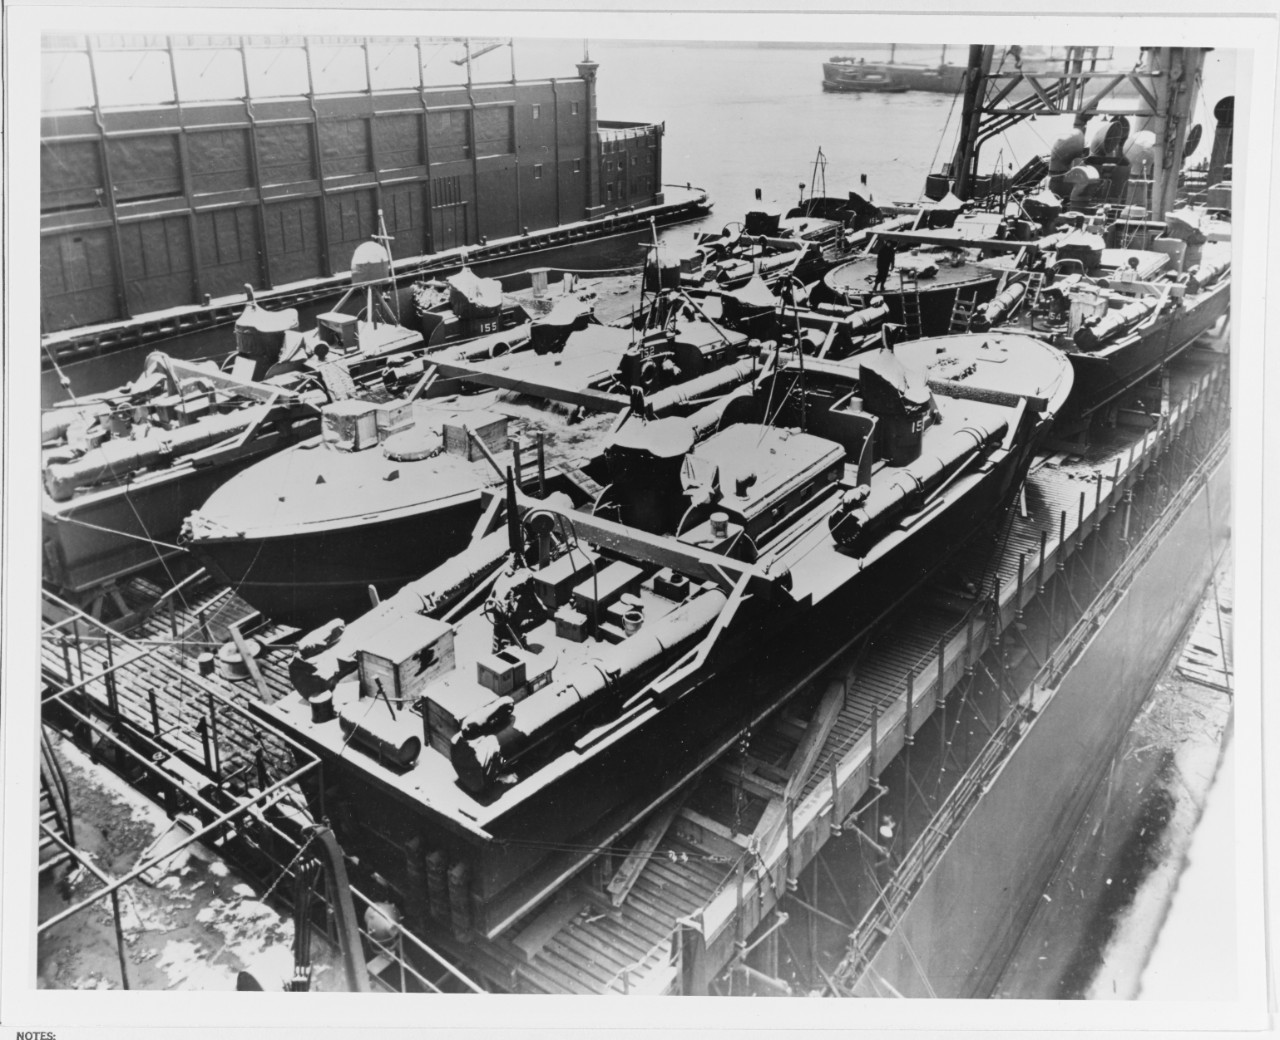 A light snowfall whitens boats of Squadron 9, loaded three abreast on SS White Plains in New York in December 1942 for shipment to Panama. See Page 64 of "At Close Quarters."